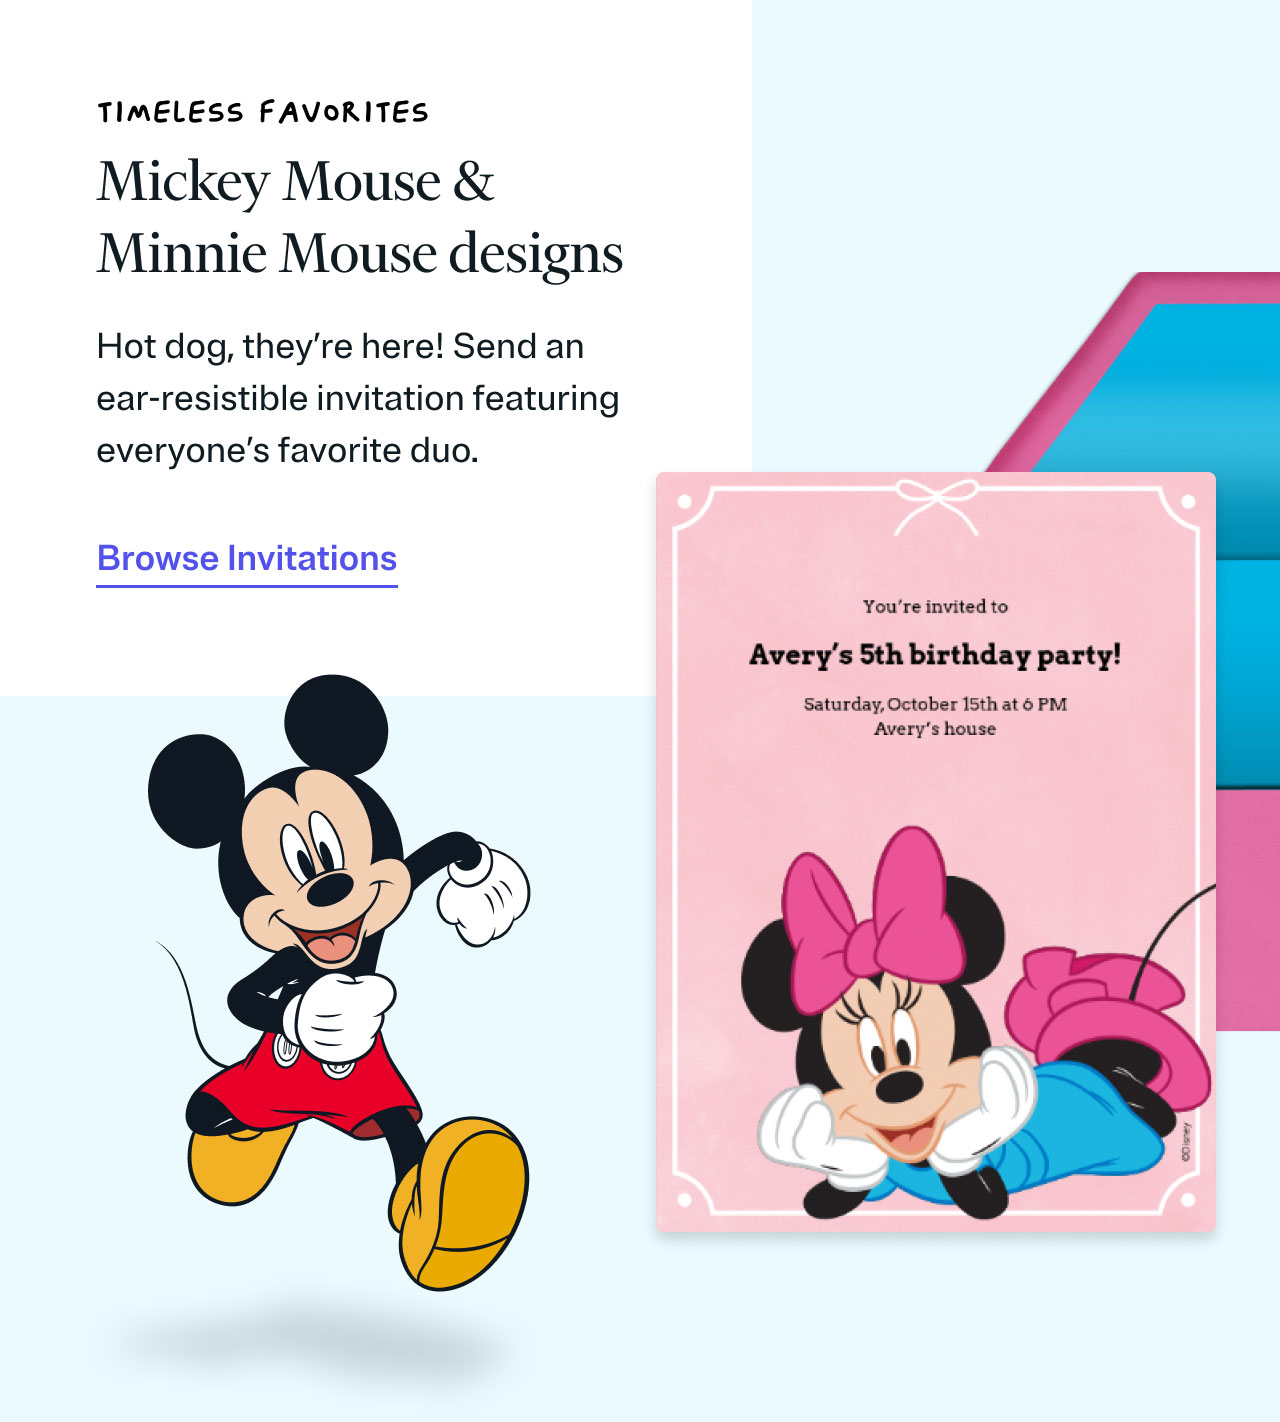 Timeless Favorites | Mickey Mouse & Minnie Mouse designs | Hot dog, they’re here! Send an ear-resistible invitation featuring everyone’s favorite duo.